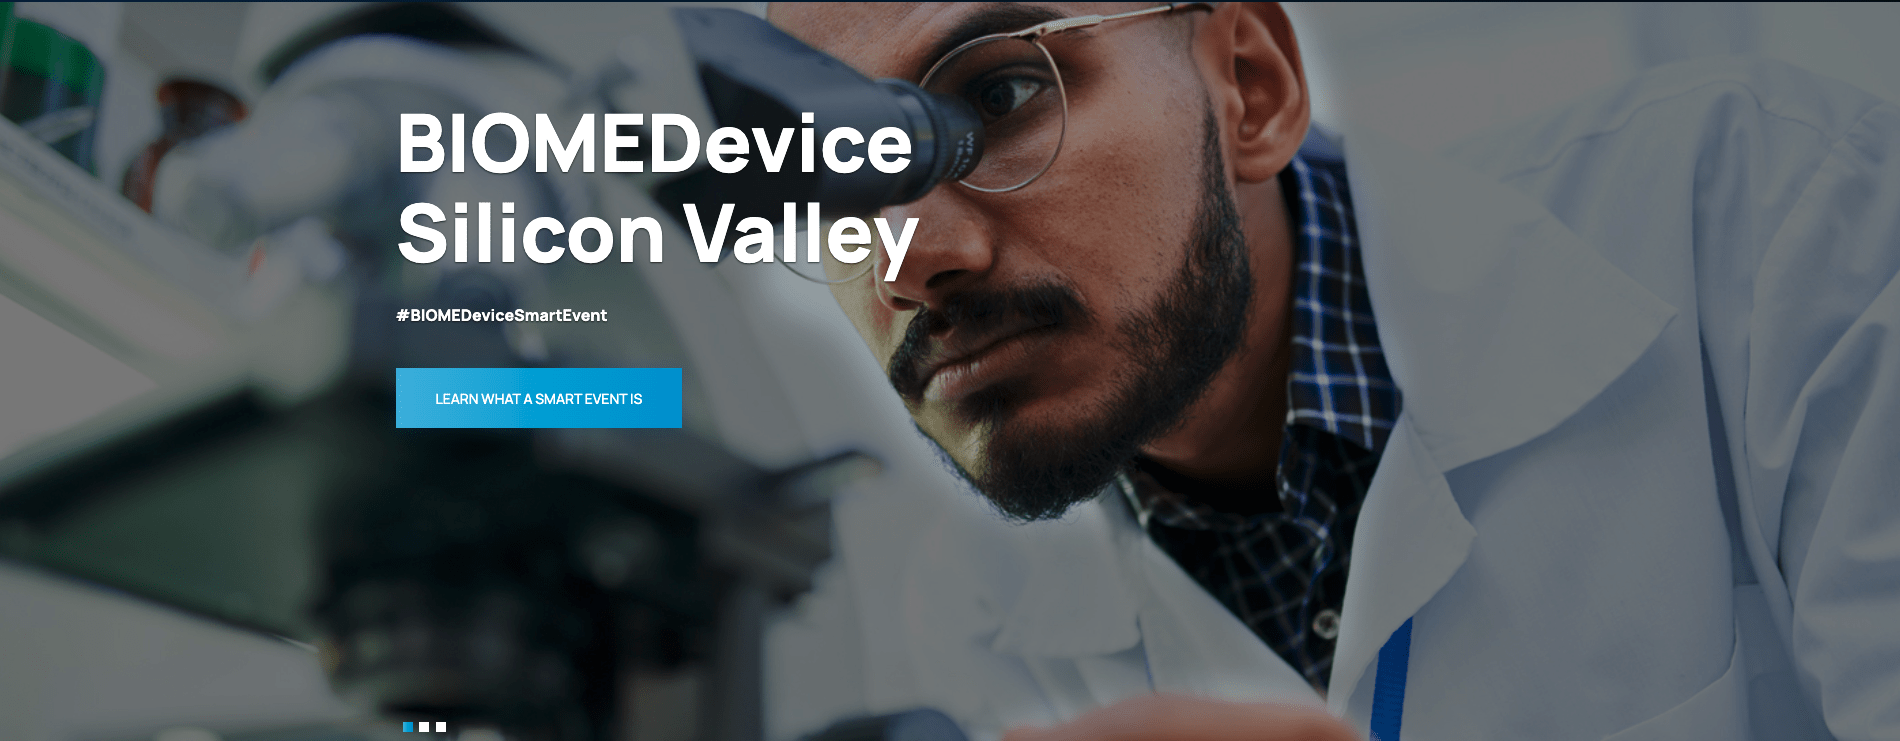 Banner for BIOMEDevice Silicon Valley event